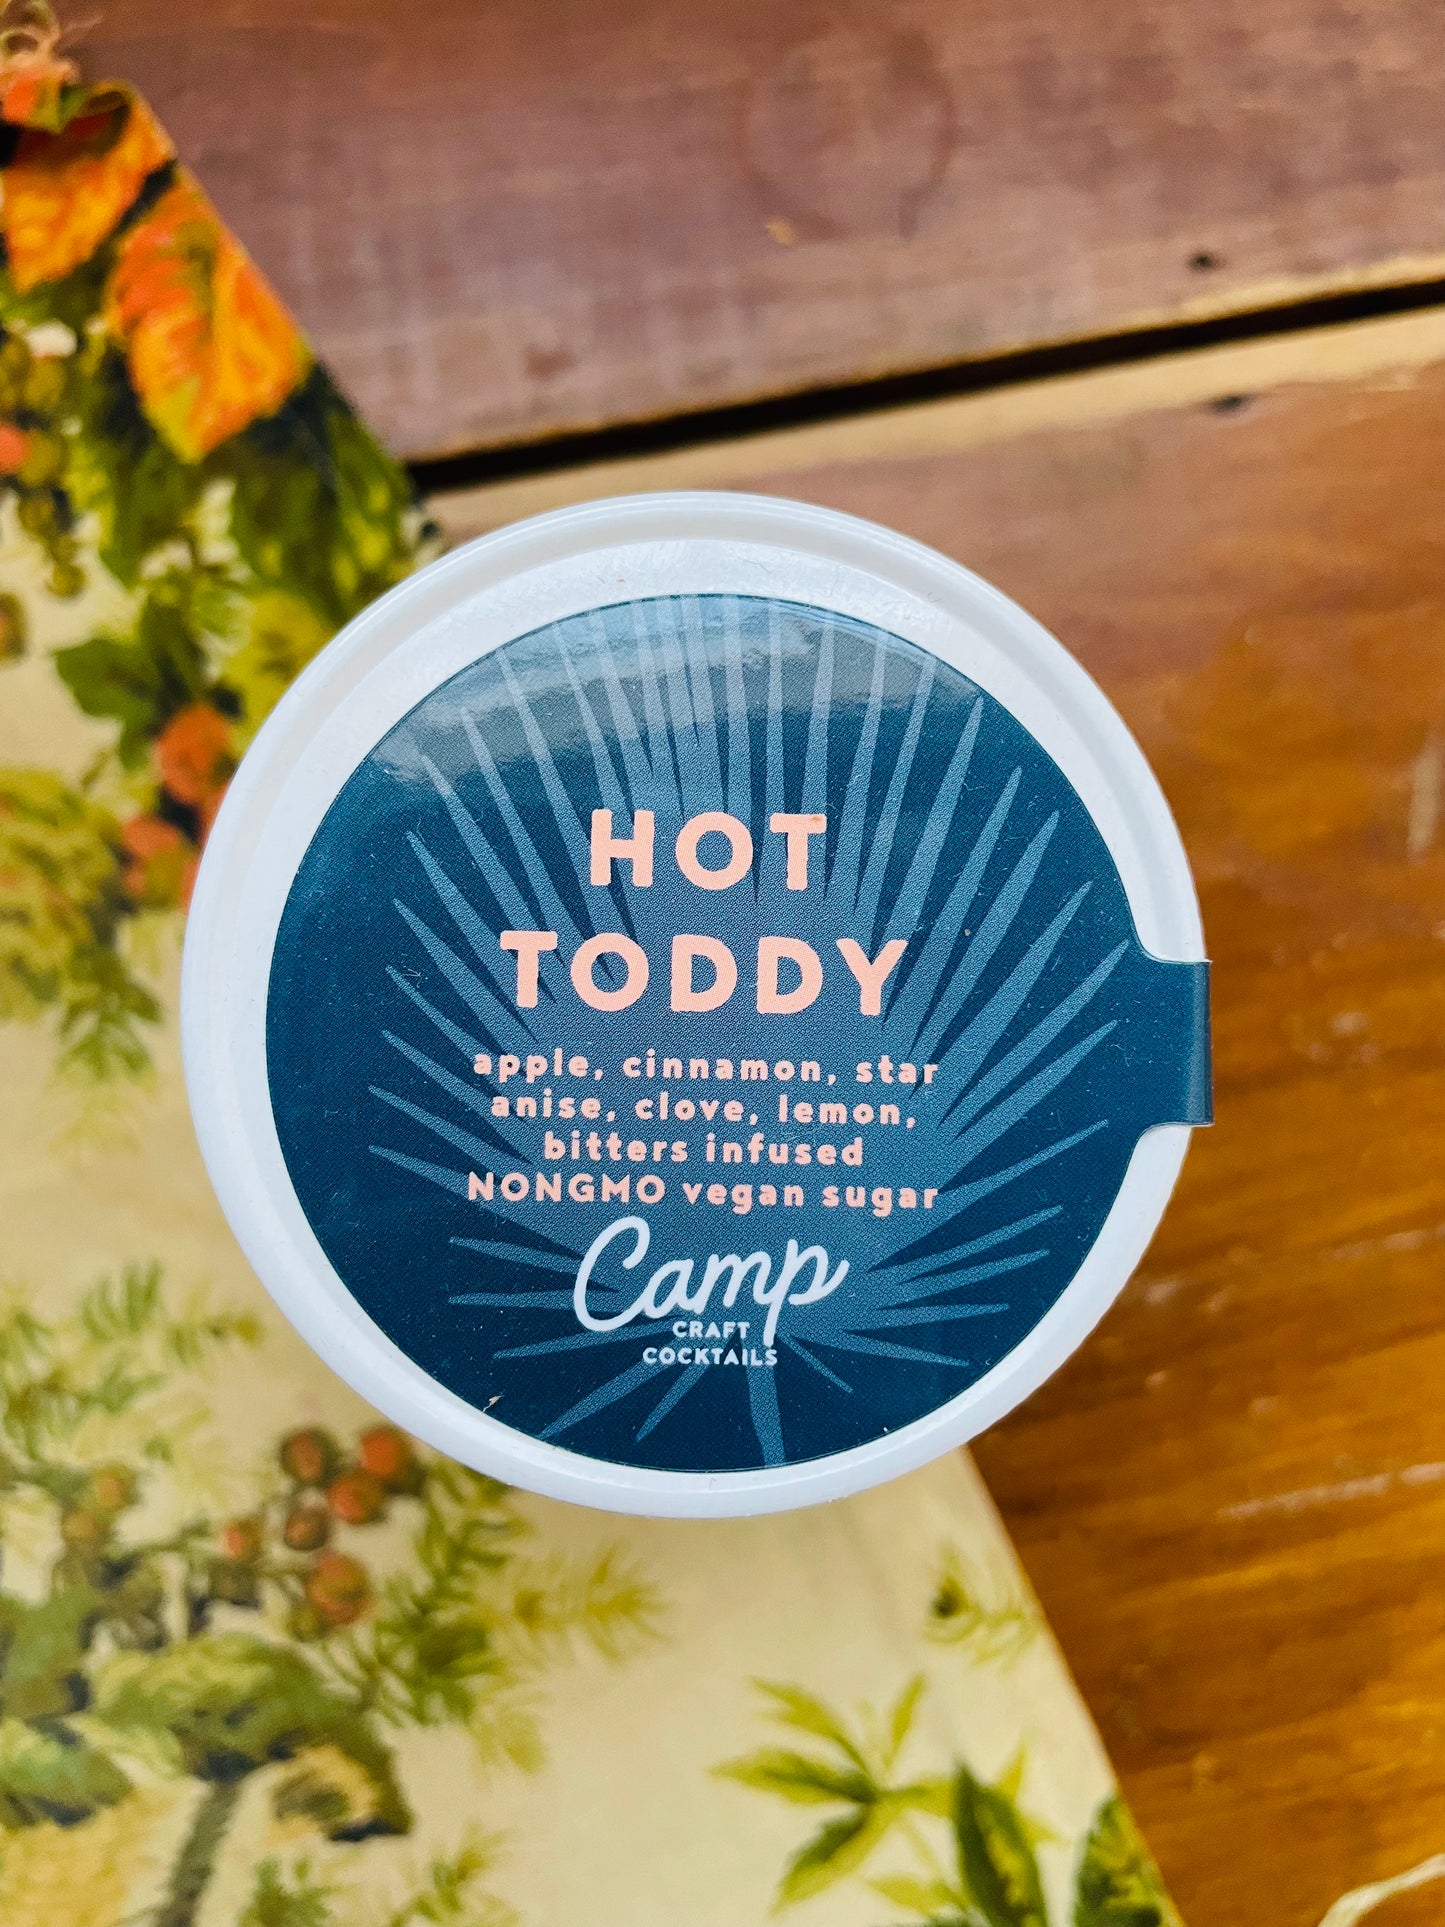 Hot Toddy Kit- Camp Craft Cocktails